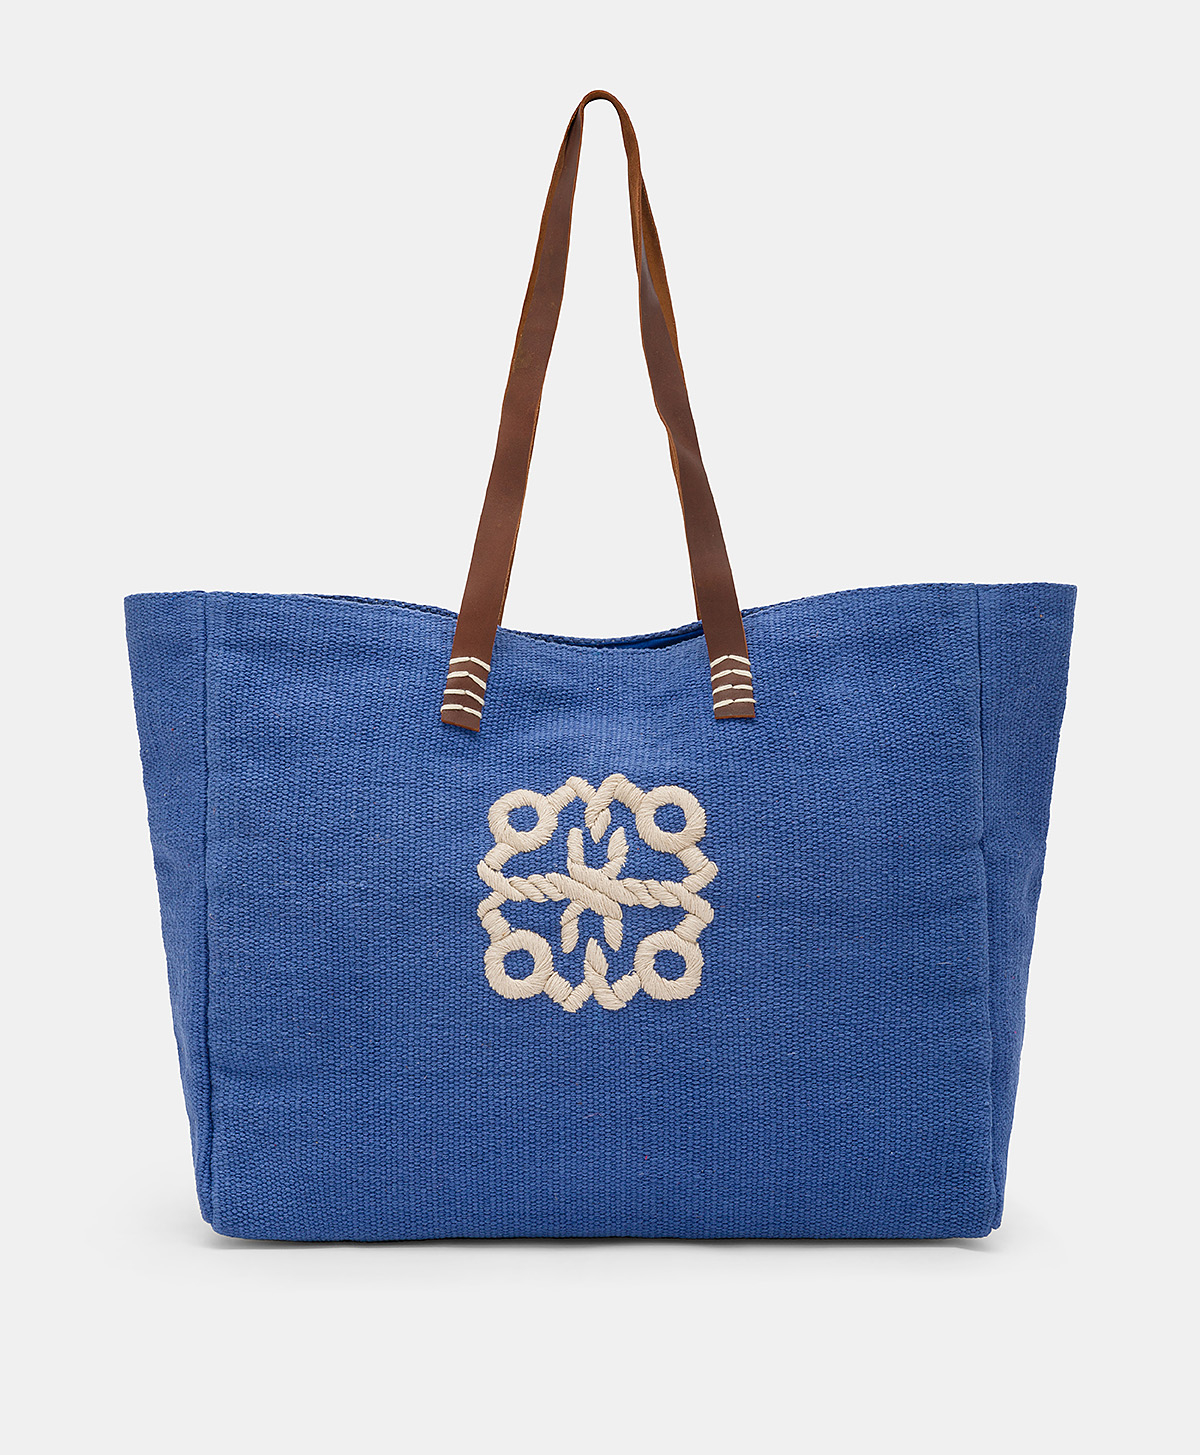 PARAGUAN BAG IN EMBROIDERED CANVAS - BLUE - Momonì